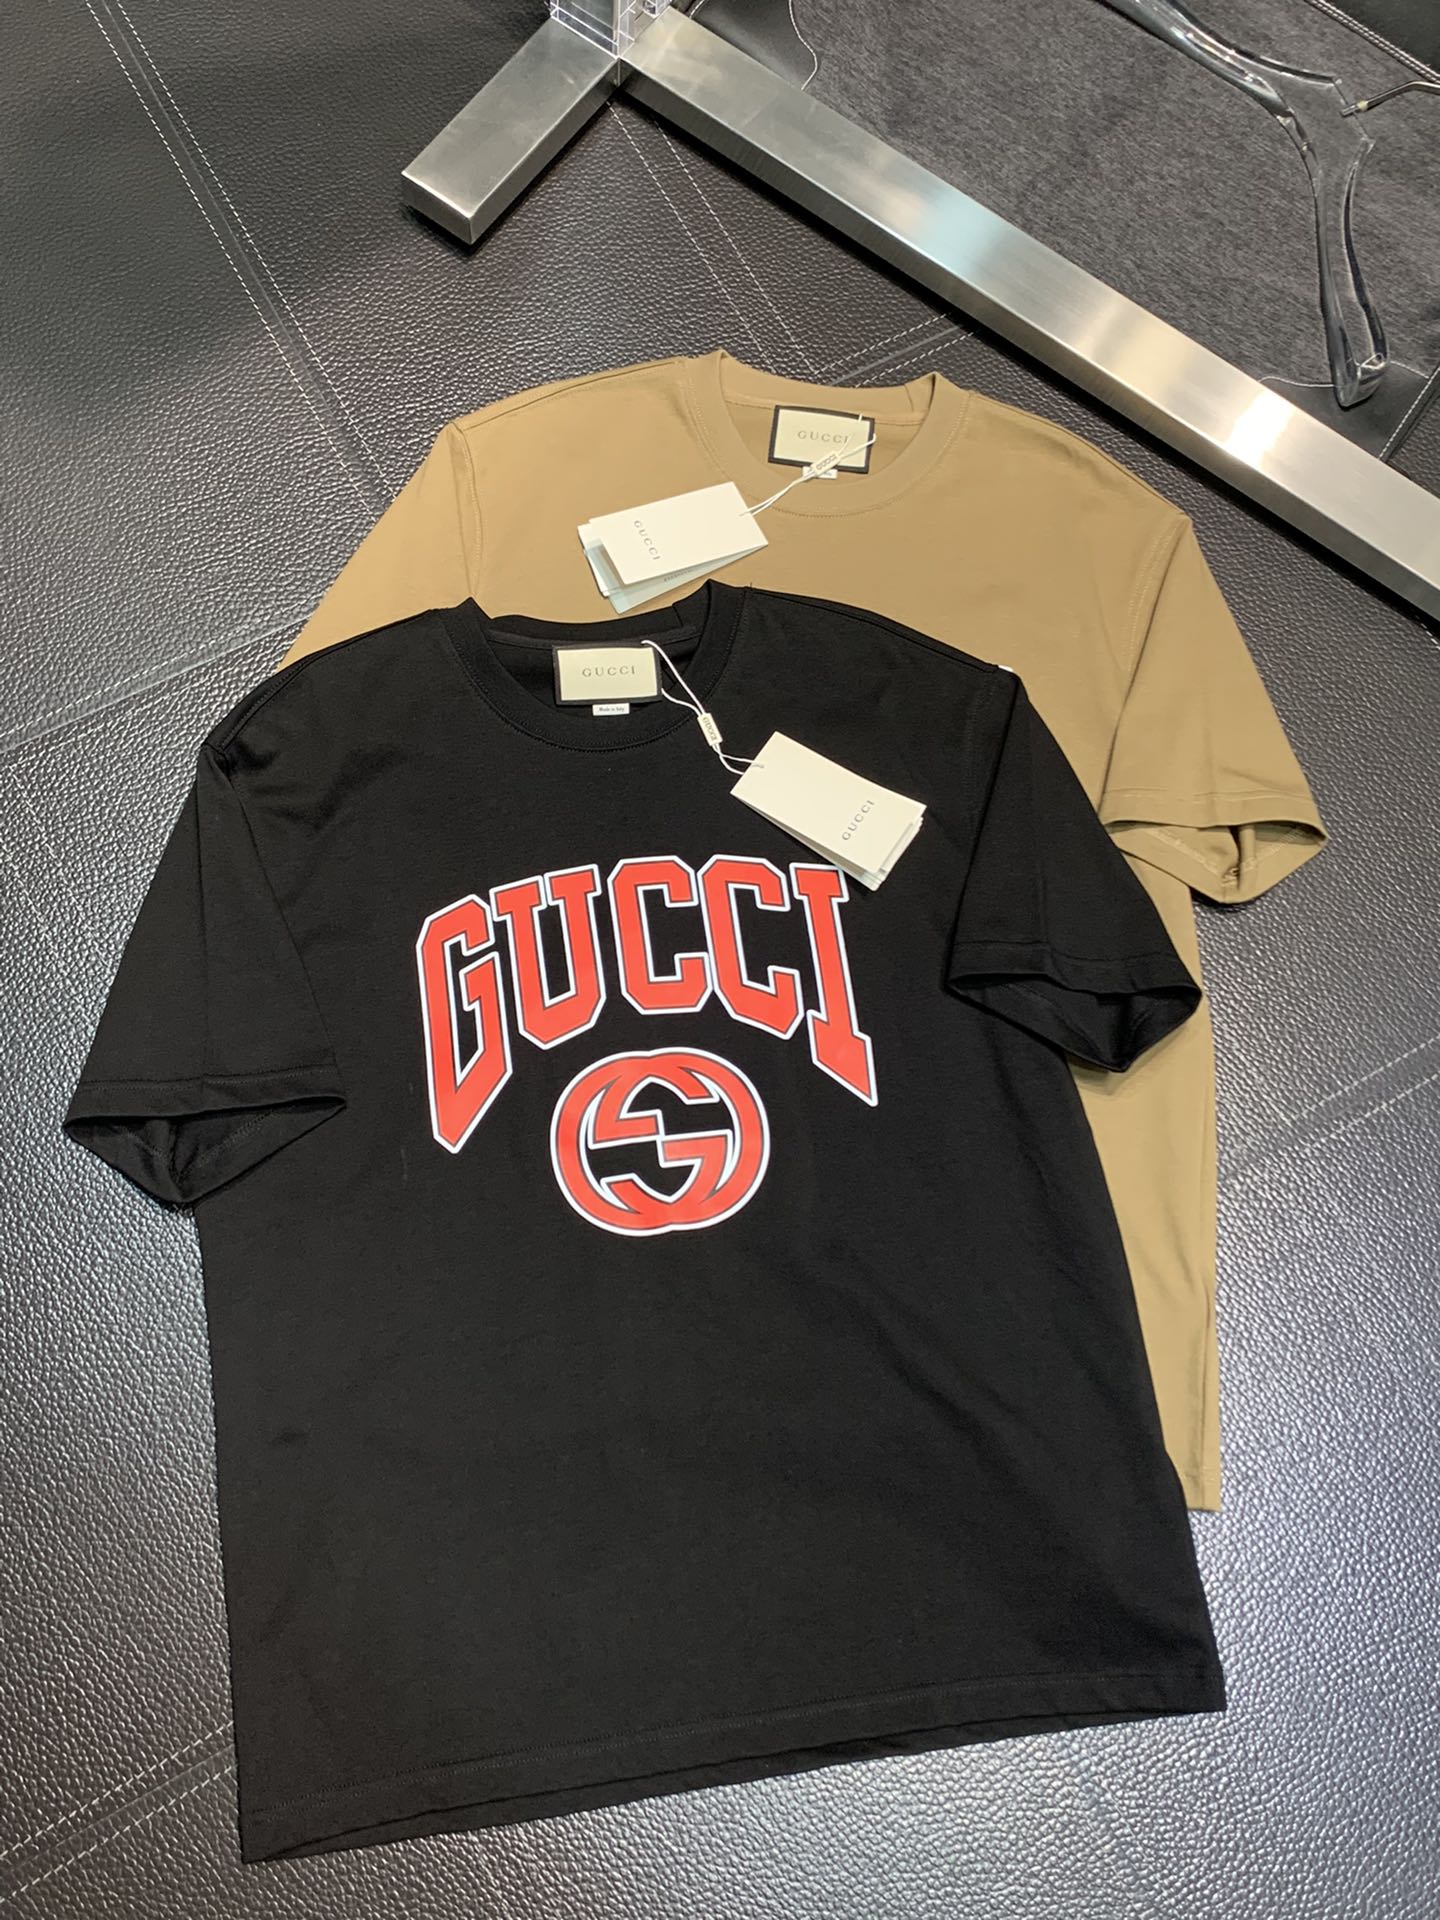 for sale cheap now
 Gucci Clothing T-Shirt Buy Online
 Men Fashion Short Sleeve